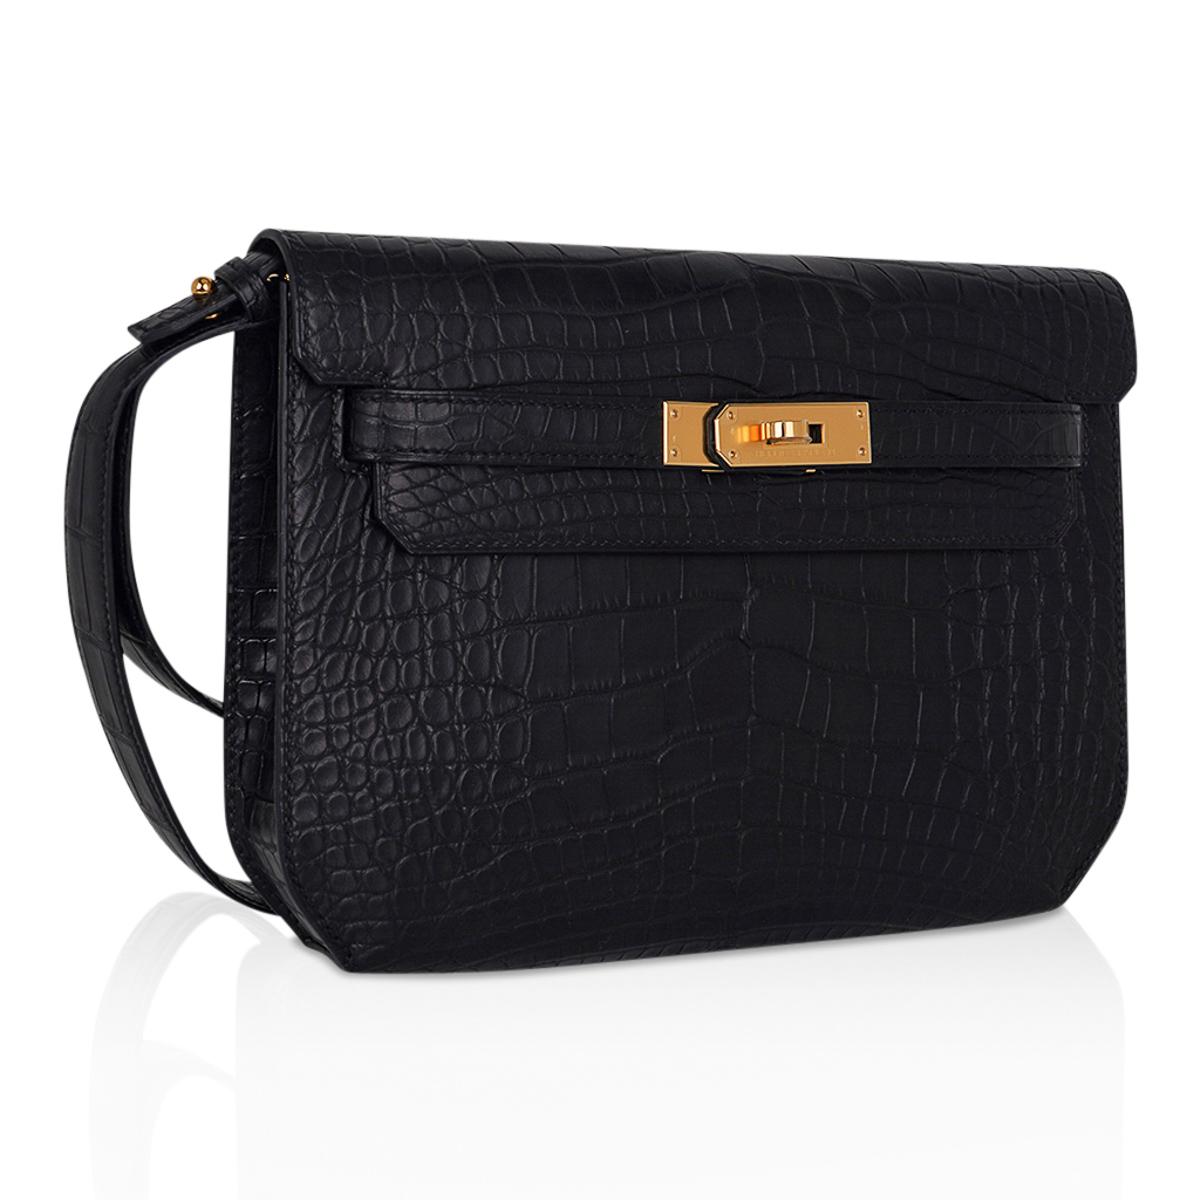 Mightychic offers a men's Hermes Kelly Depeches 25 Pouch featured in Black matte Alligator.
Fabulous unisex Hermes clutch that is perfect for day to evening wear.
Lush with Gold hardware.
Pouch opens to a divided compartment.
Lanyard is